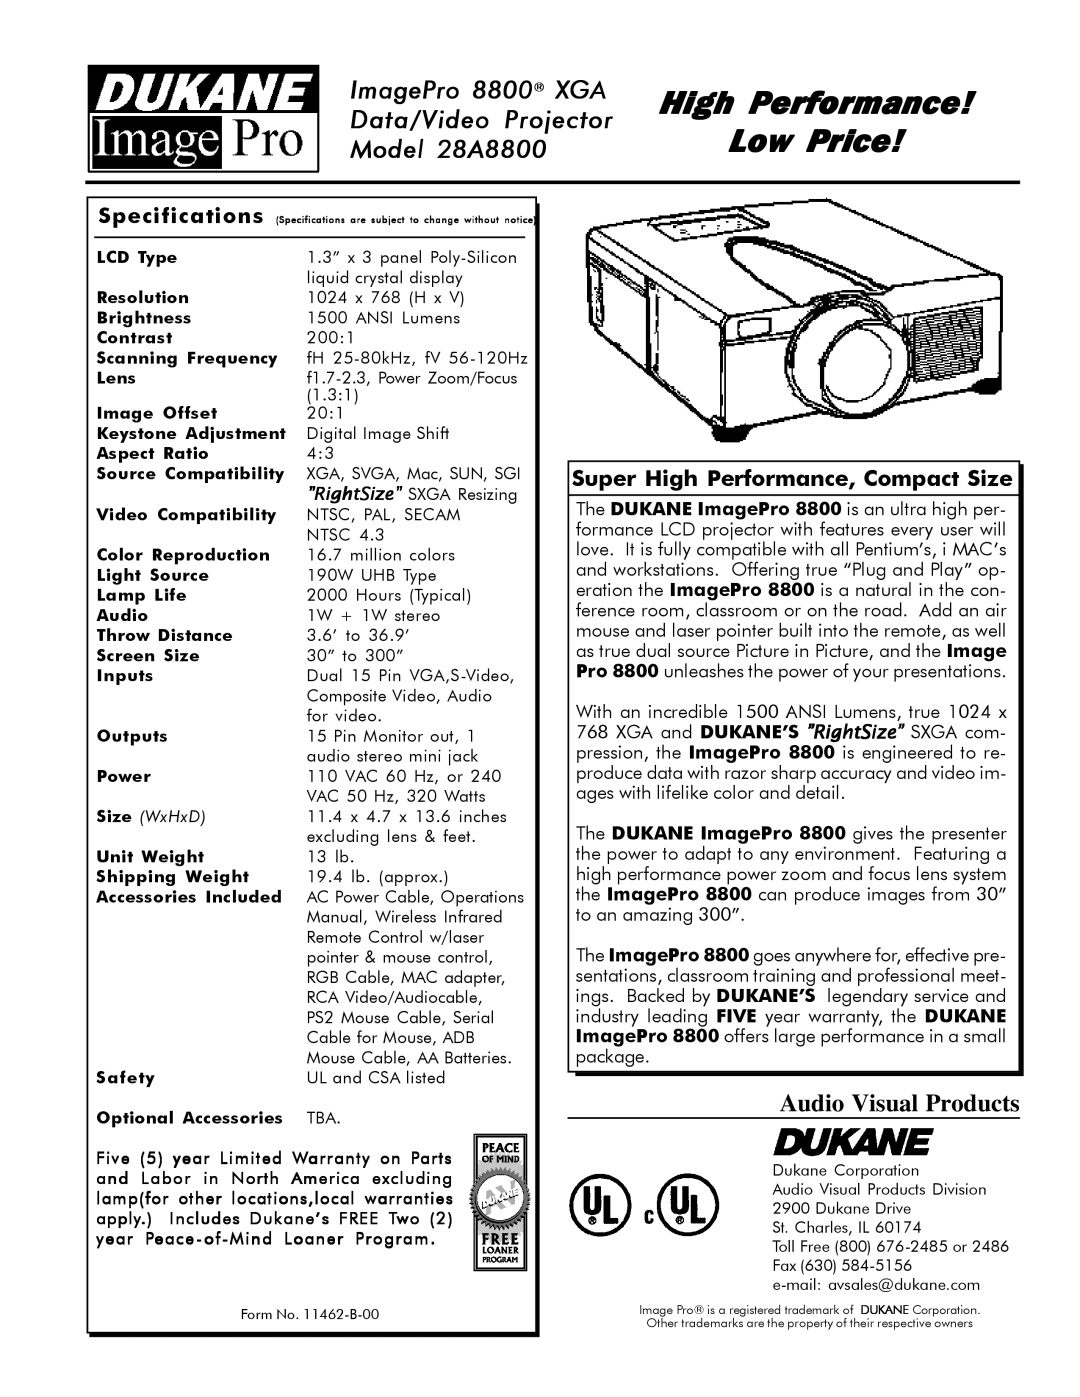 Dukane High Performance Low Price, ImagePro 8800 XGA Data/Video Projector Model 28A8800, Audio Visual Products 